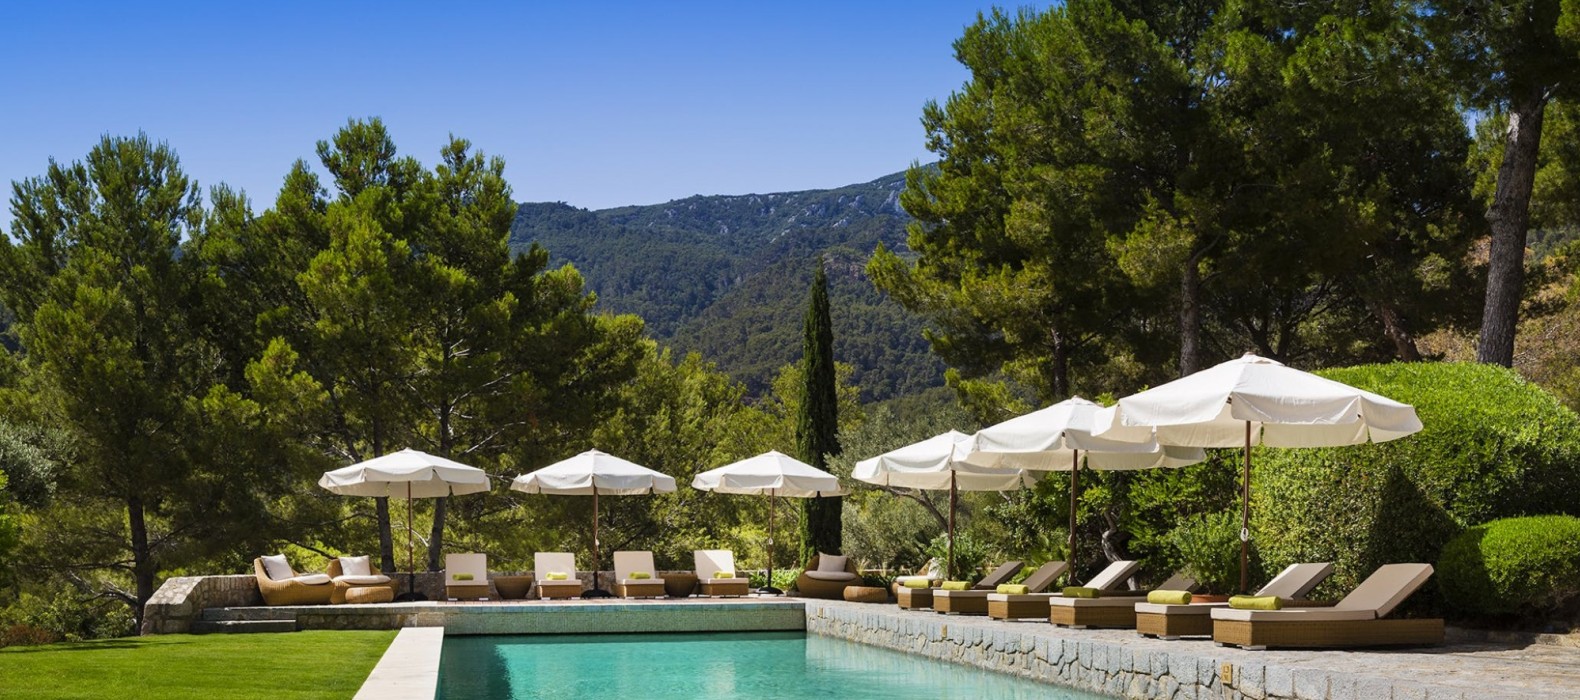 Exterior pool area with sun loungers of Villa Foreste in Mallorca